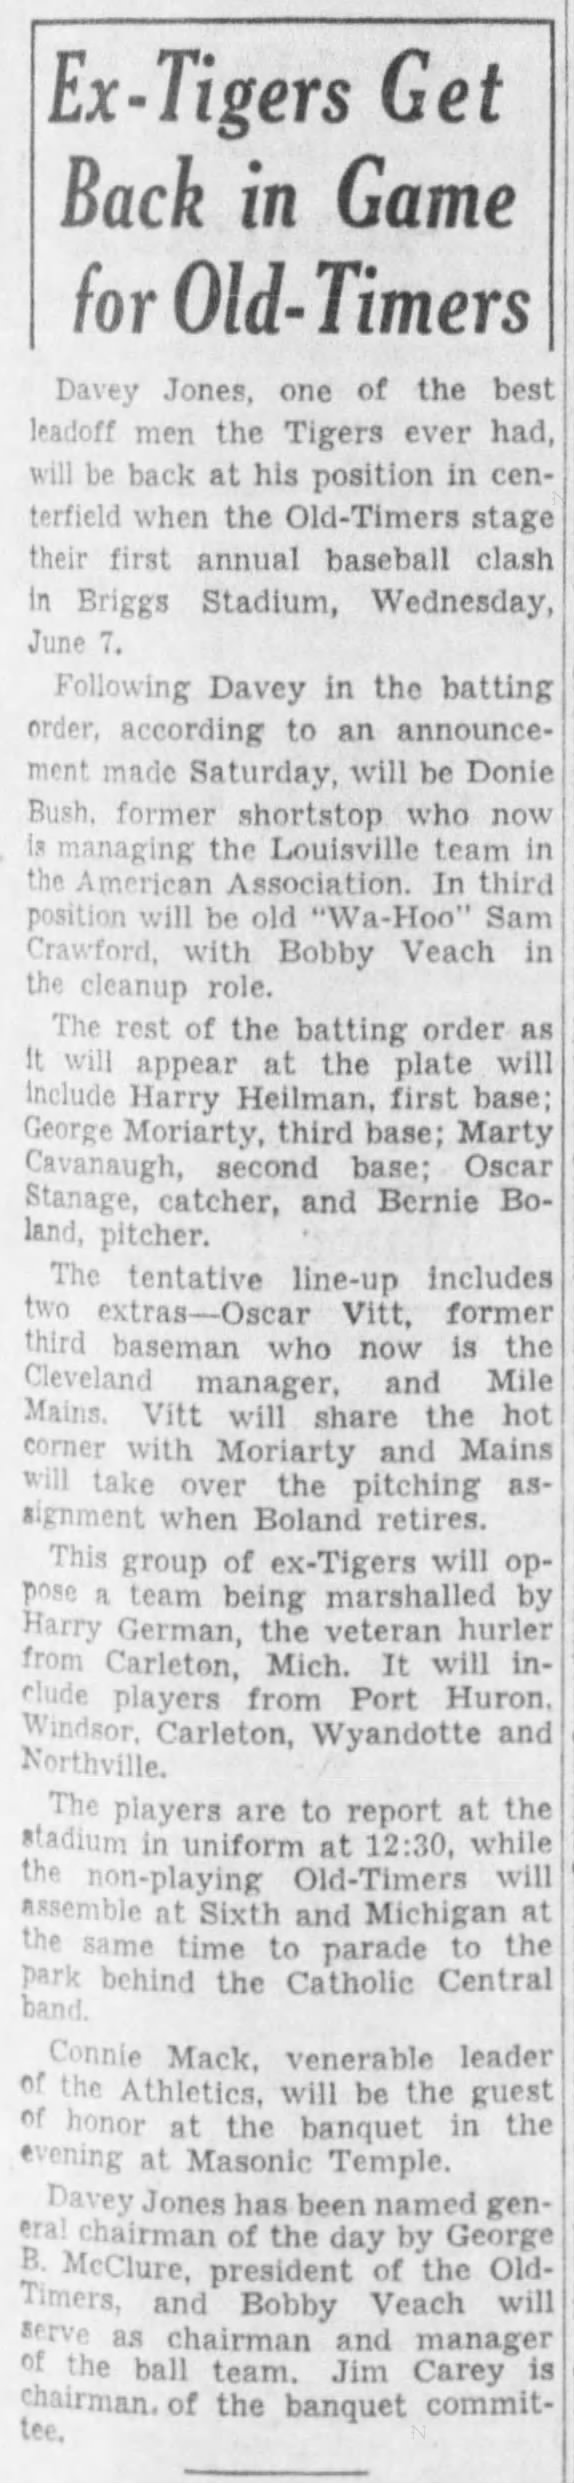 Sun 5/28/39: Announcement about Tigers' 1st Old-Timers game